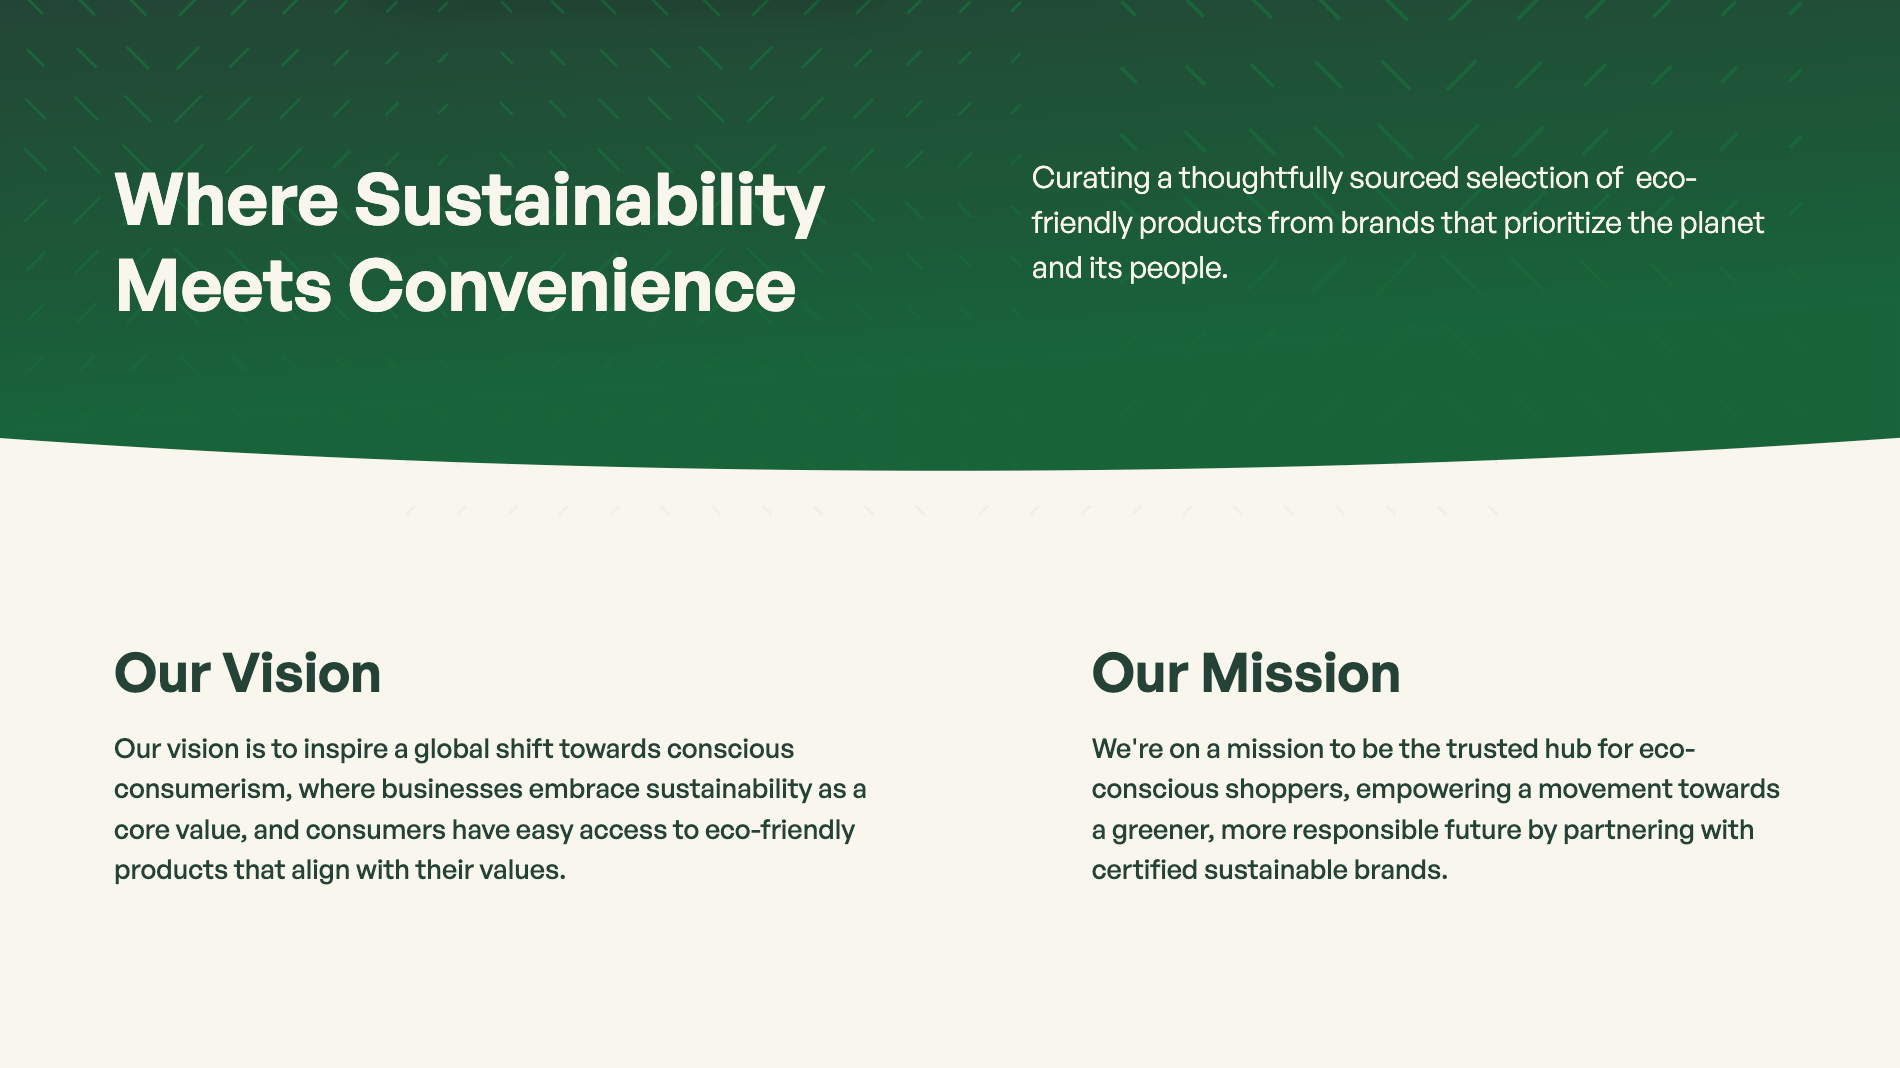 Header of the Mission page